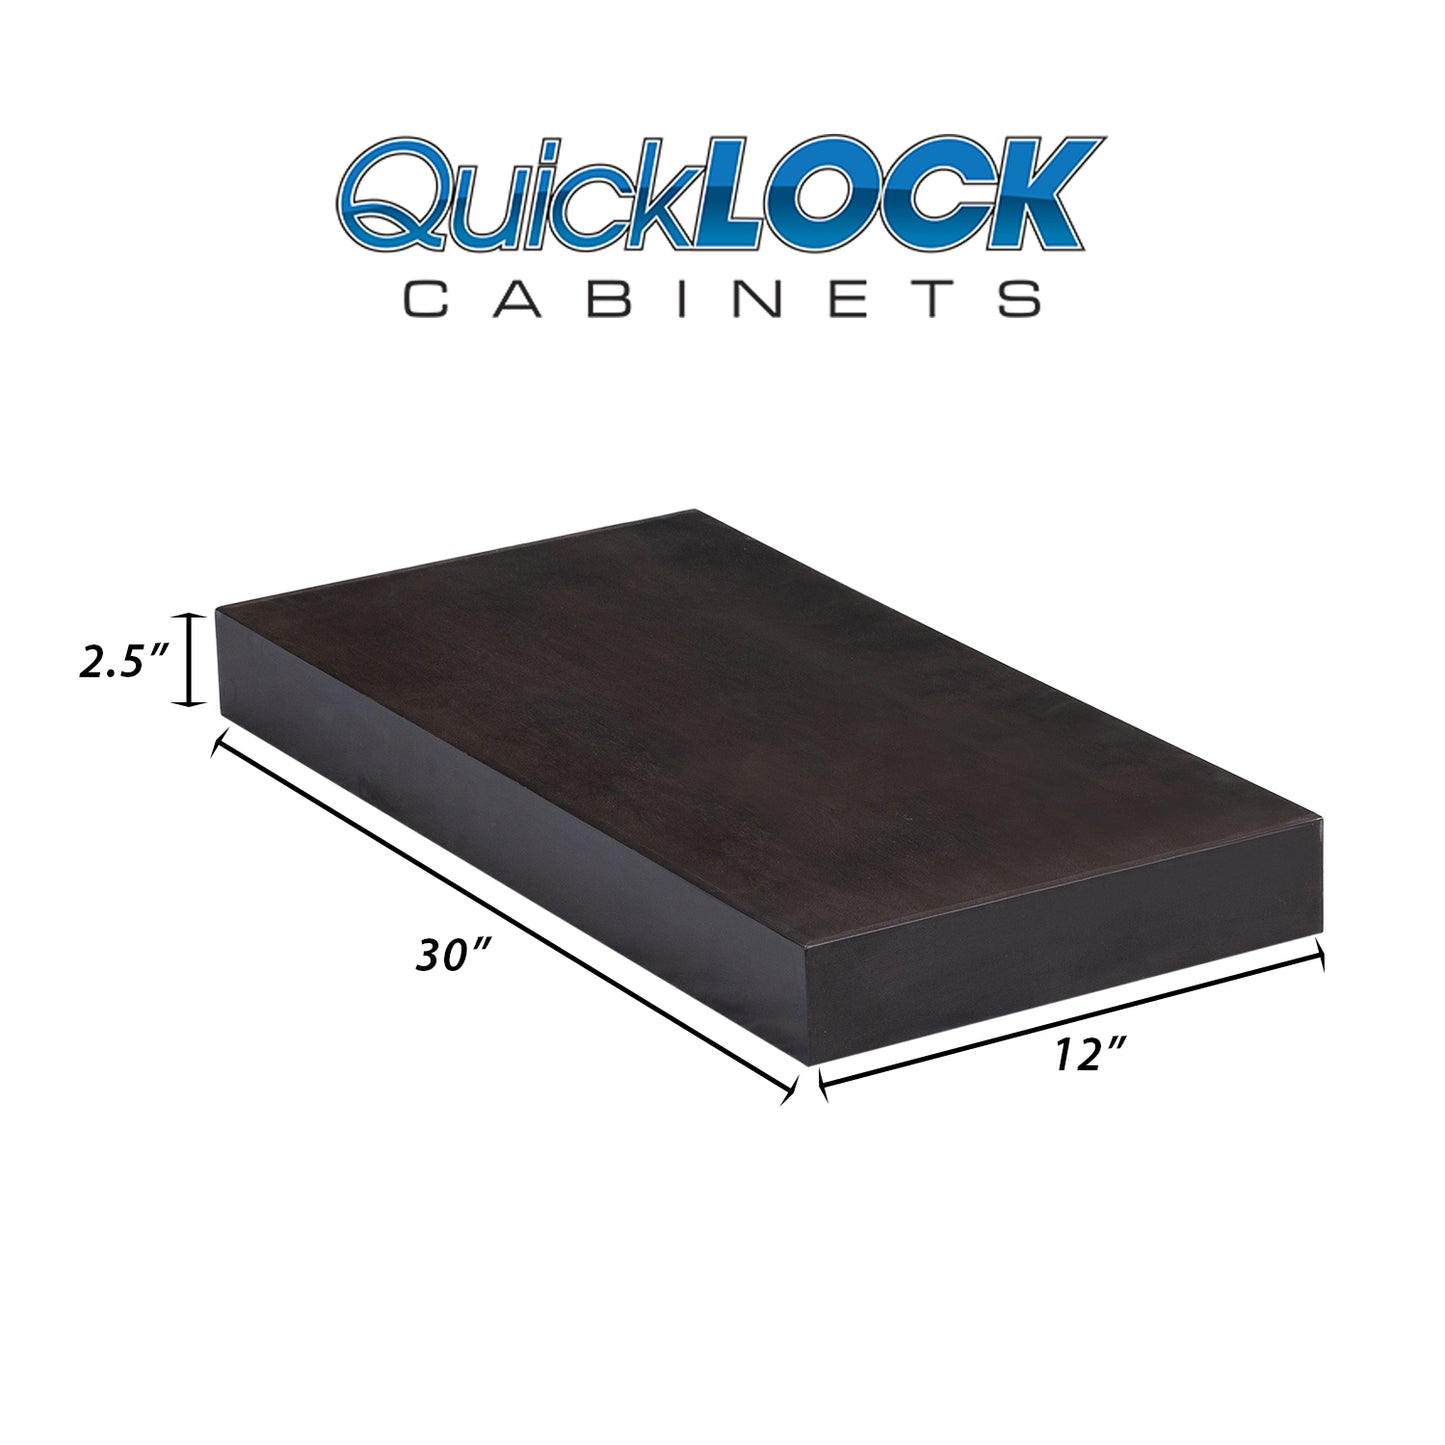 Quicklock Cabinets Floating Shelves | 2.5" Thick | Espresso Stain, 12" D x 30" W x 2.5" H | American Made | Hardwood Bracket | Complete Shelf Unit